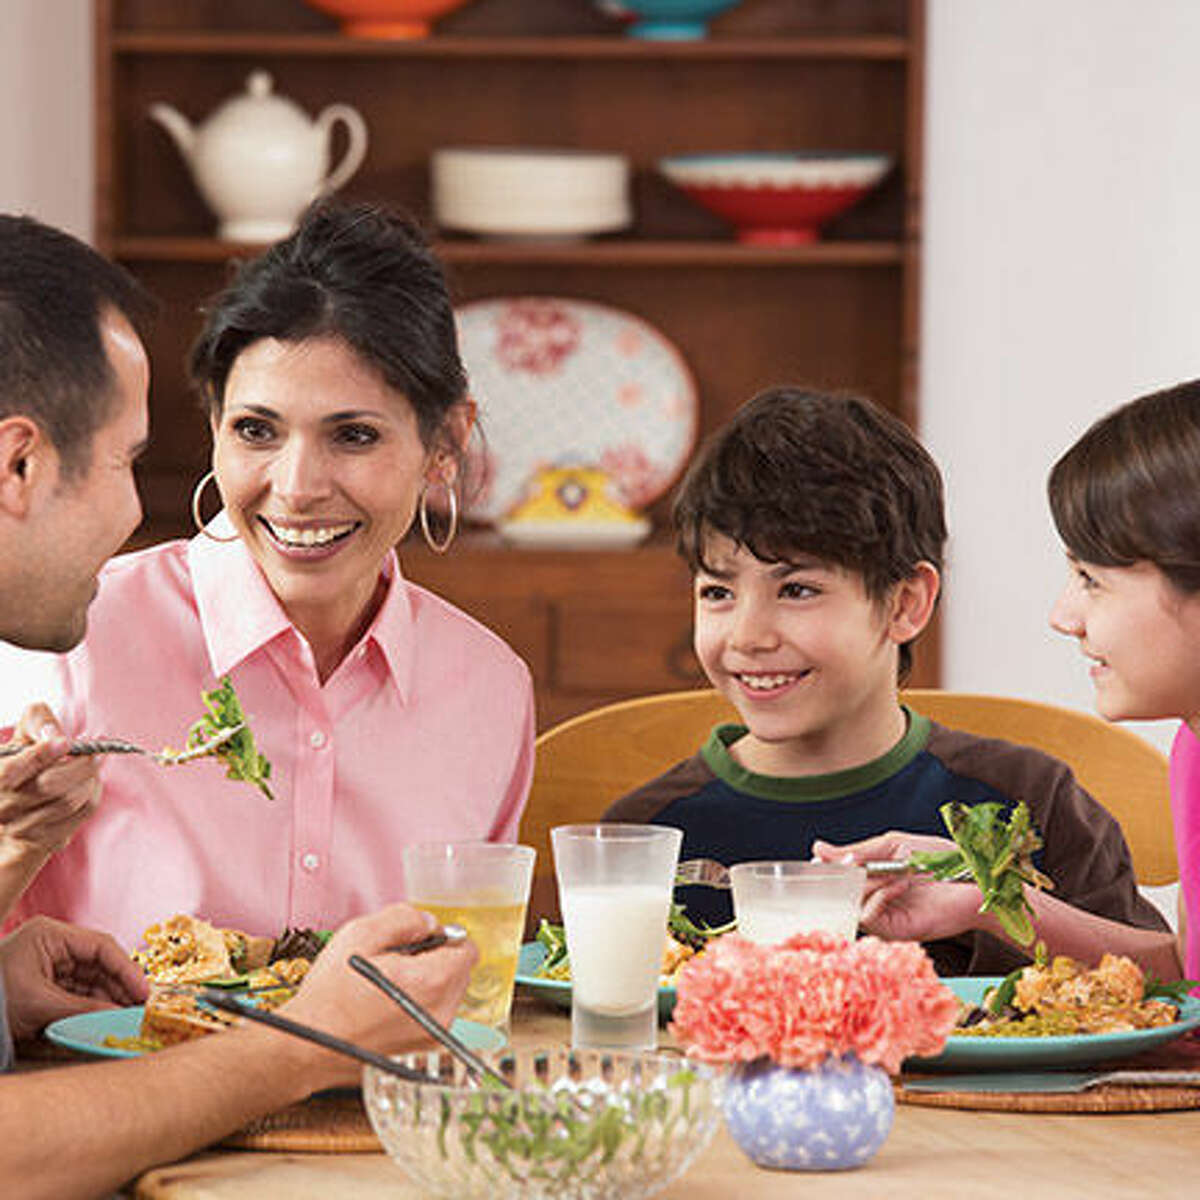 Family Meals Make a Difference